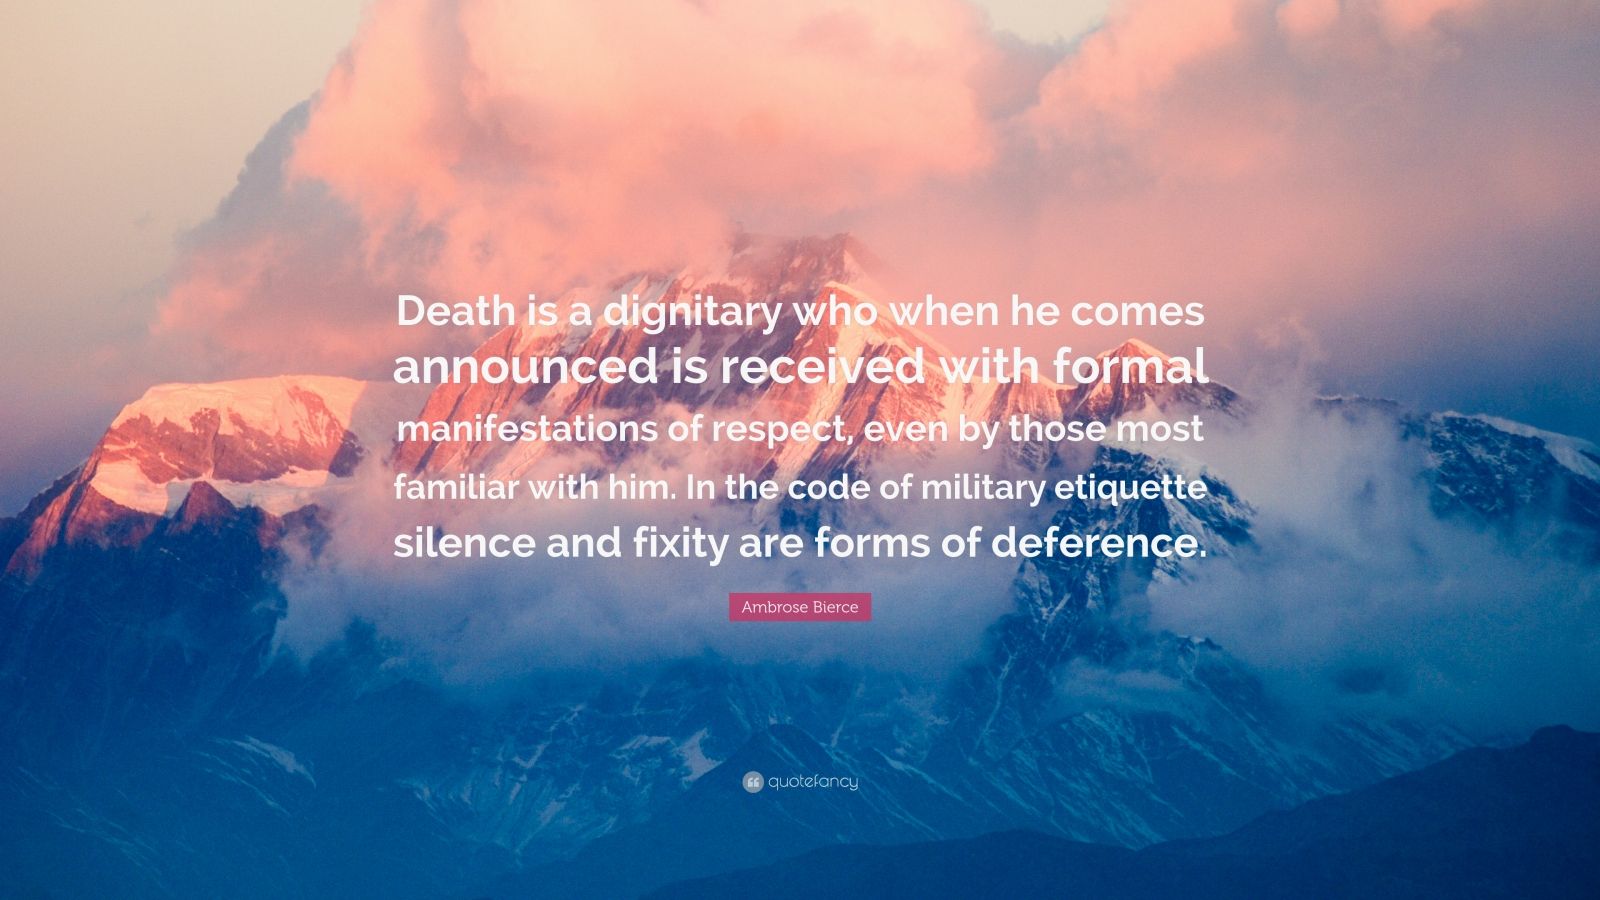 Ambrose Bierce Quote: “Death is a dignitary who when he comes announced ...